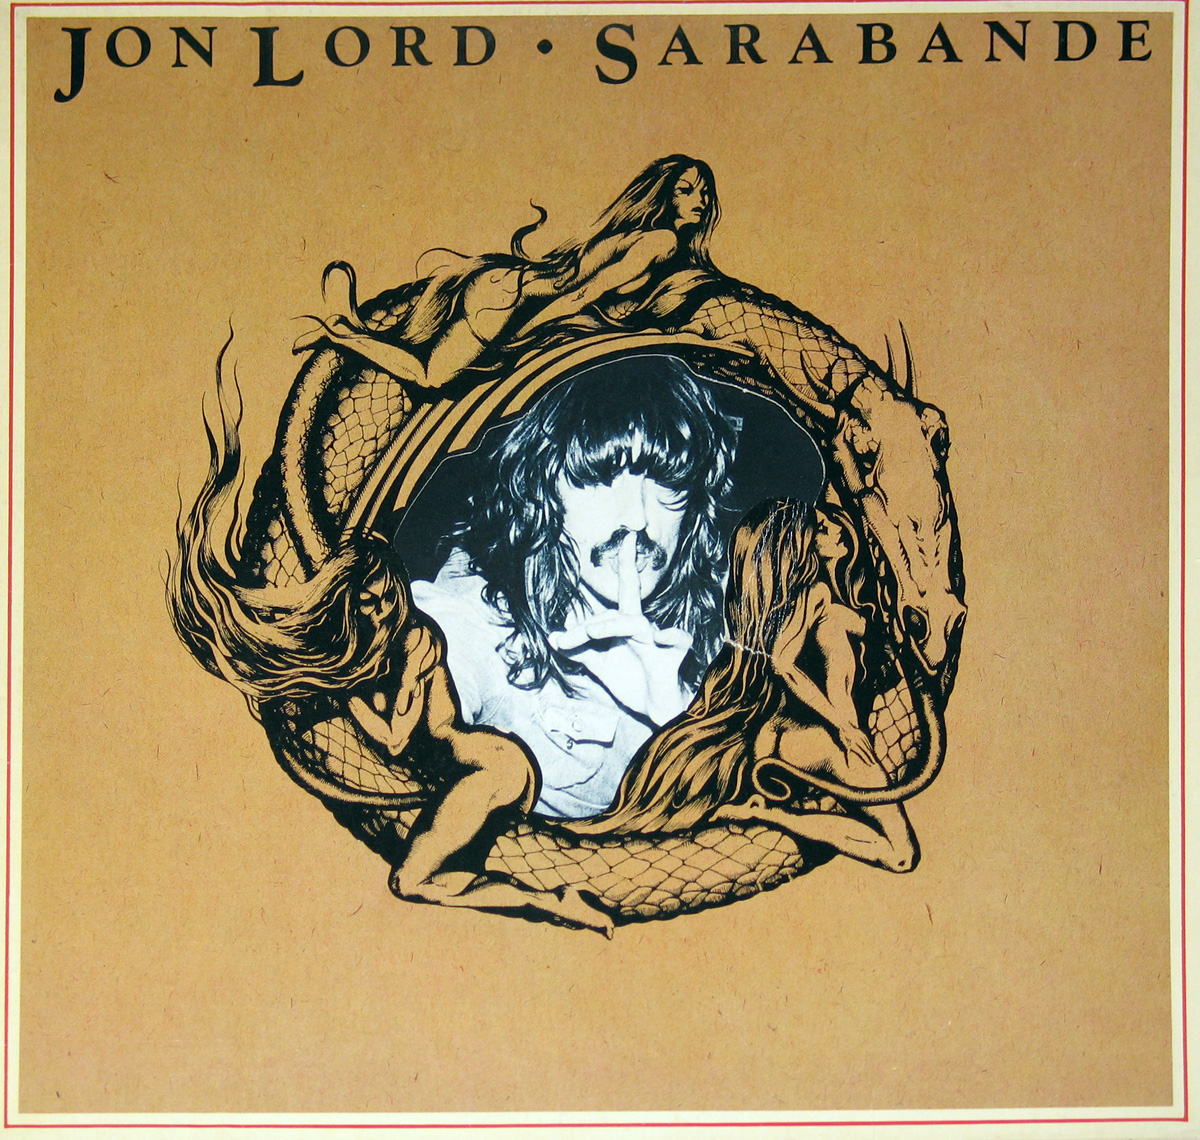 JON LORD - Sarabande - Hörzu Release with die-cut album cover front cover https://vinyl-records.nl